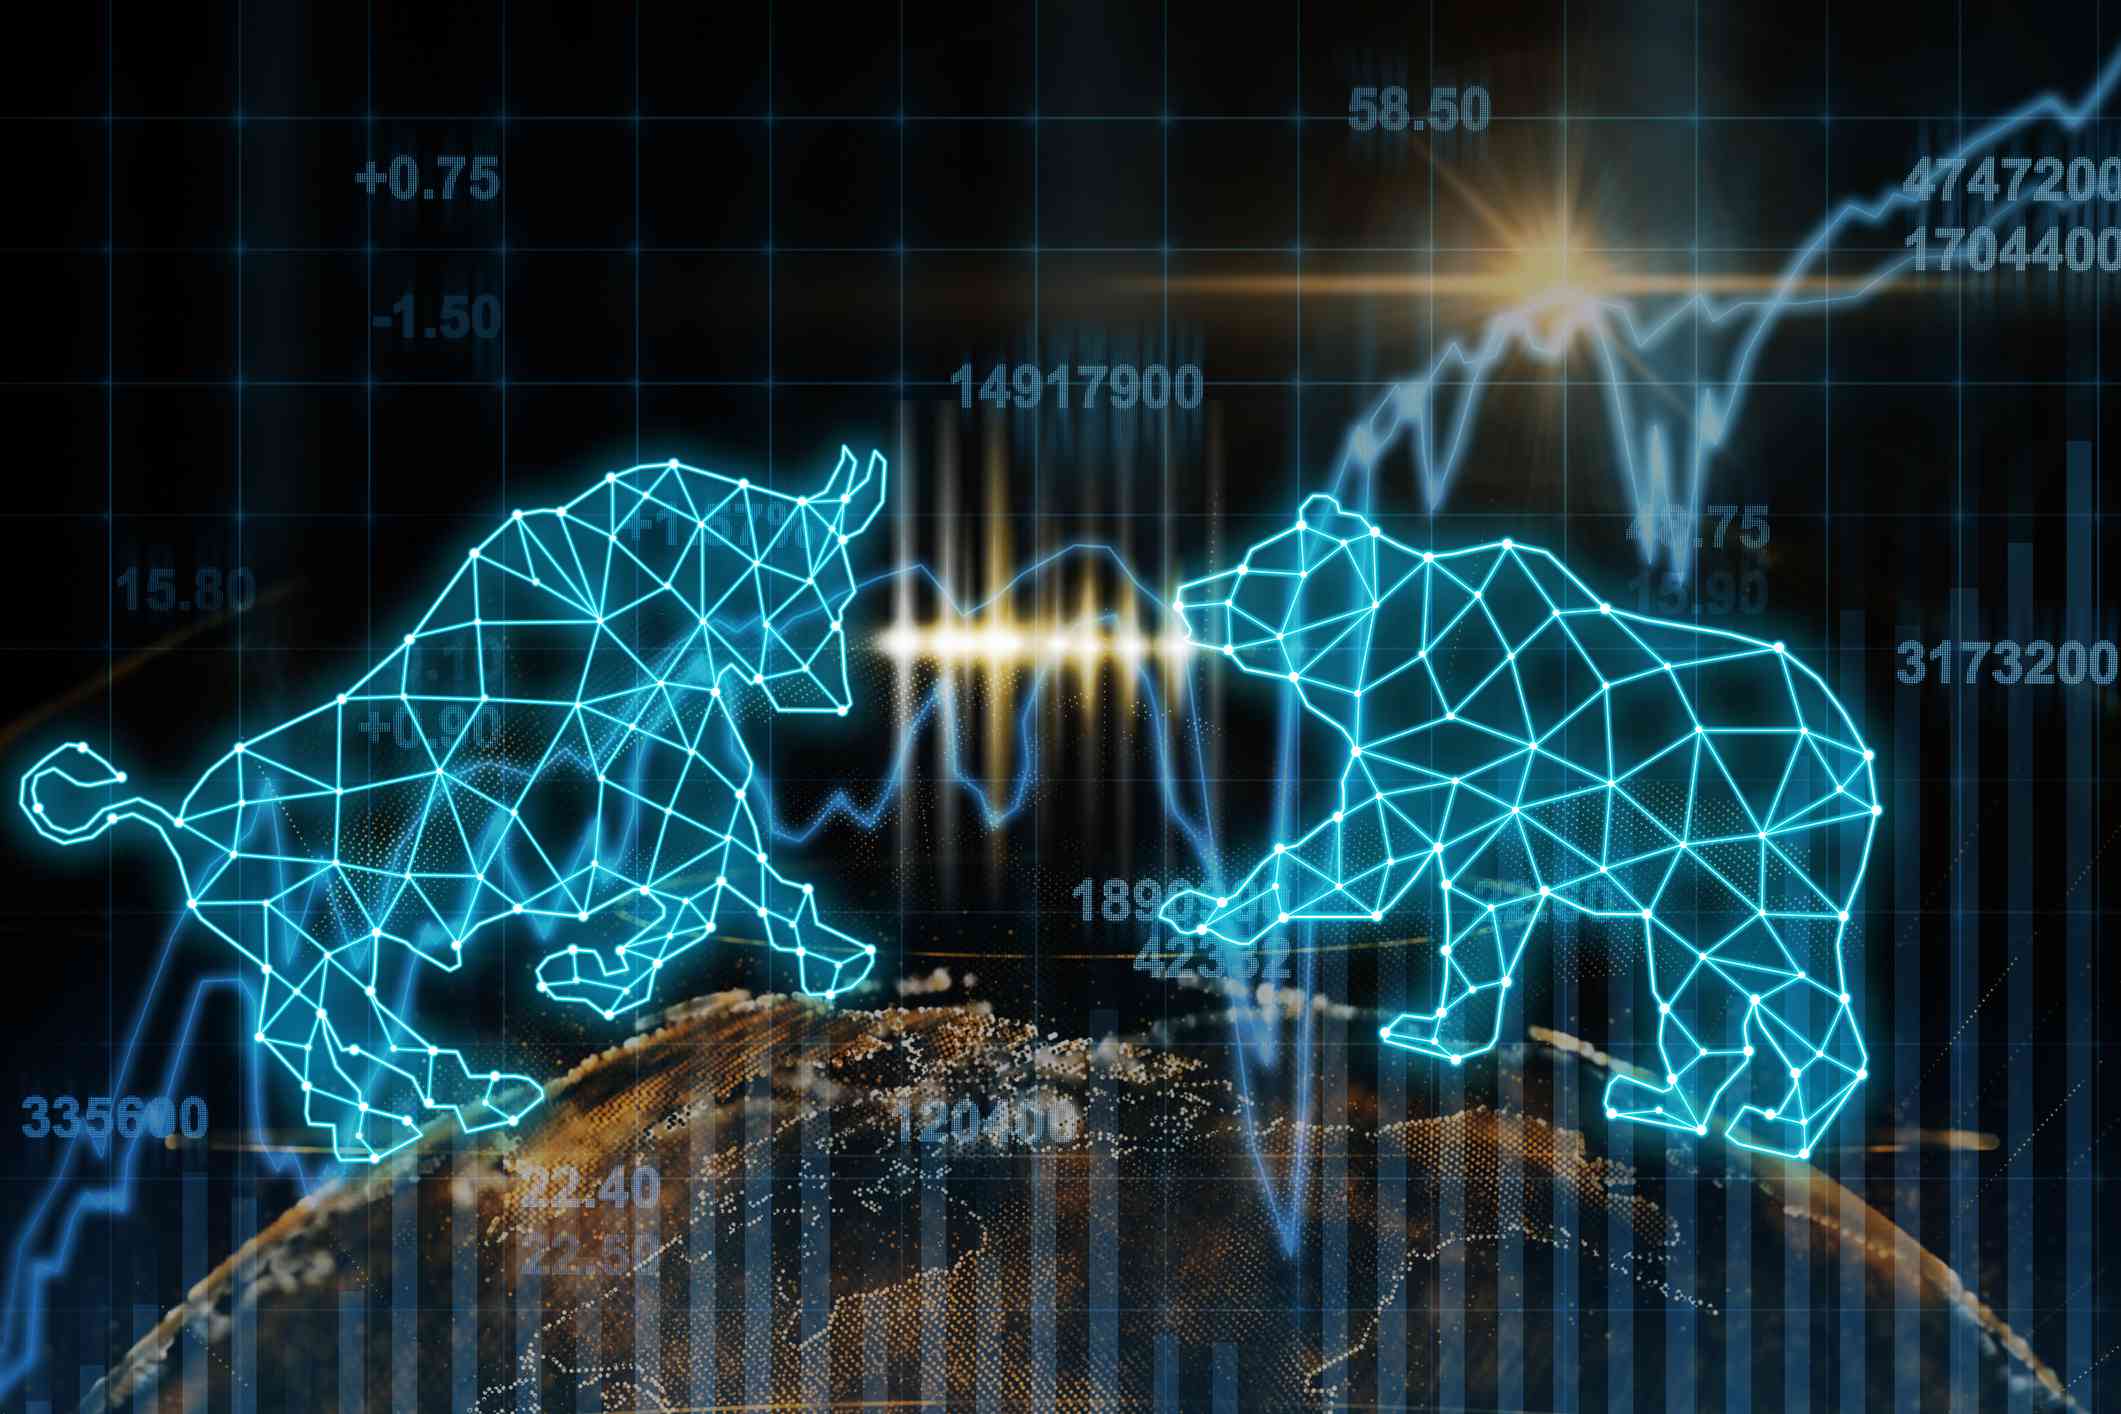 Bull and Bear polygonal shape writing by lines and dots over the abstract planet earth particle over the Stock market chart.